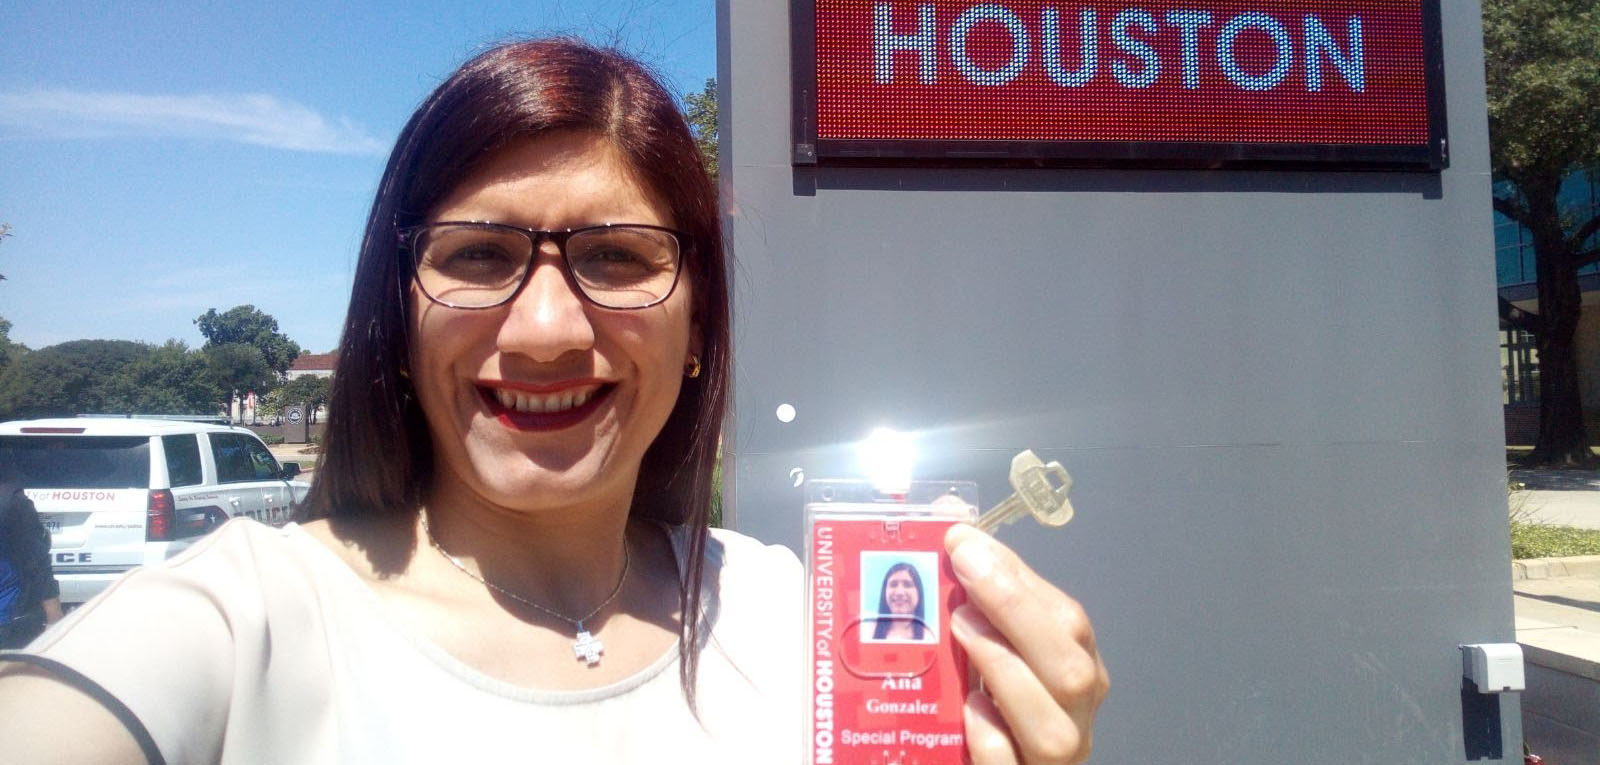 Ana Gonzalez holding her ID card in front of University of Houston sign